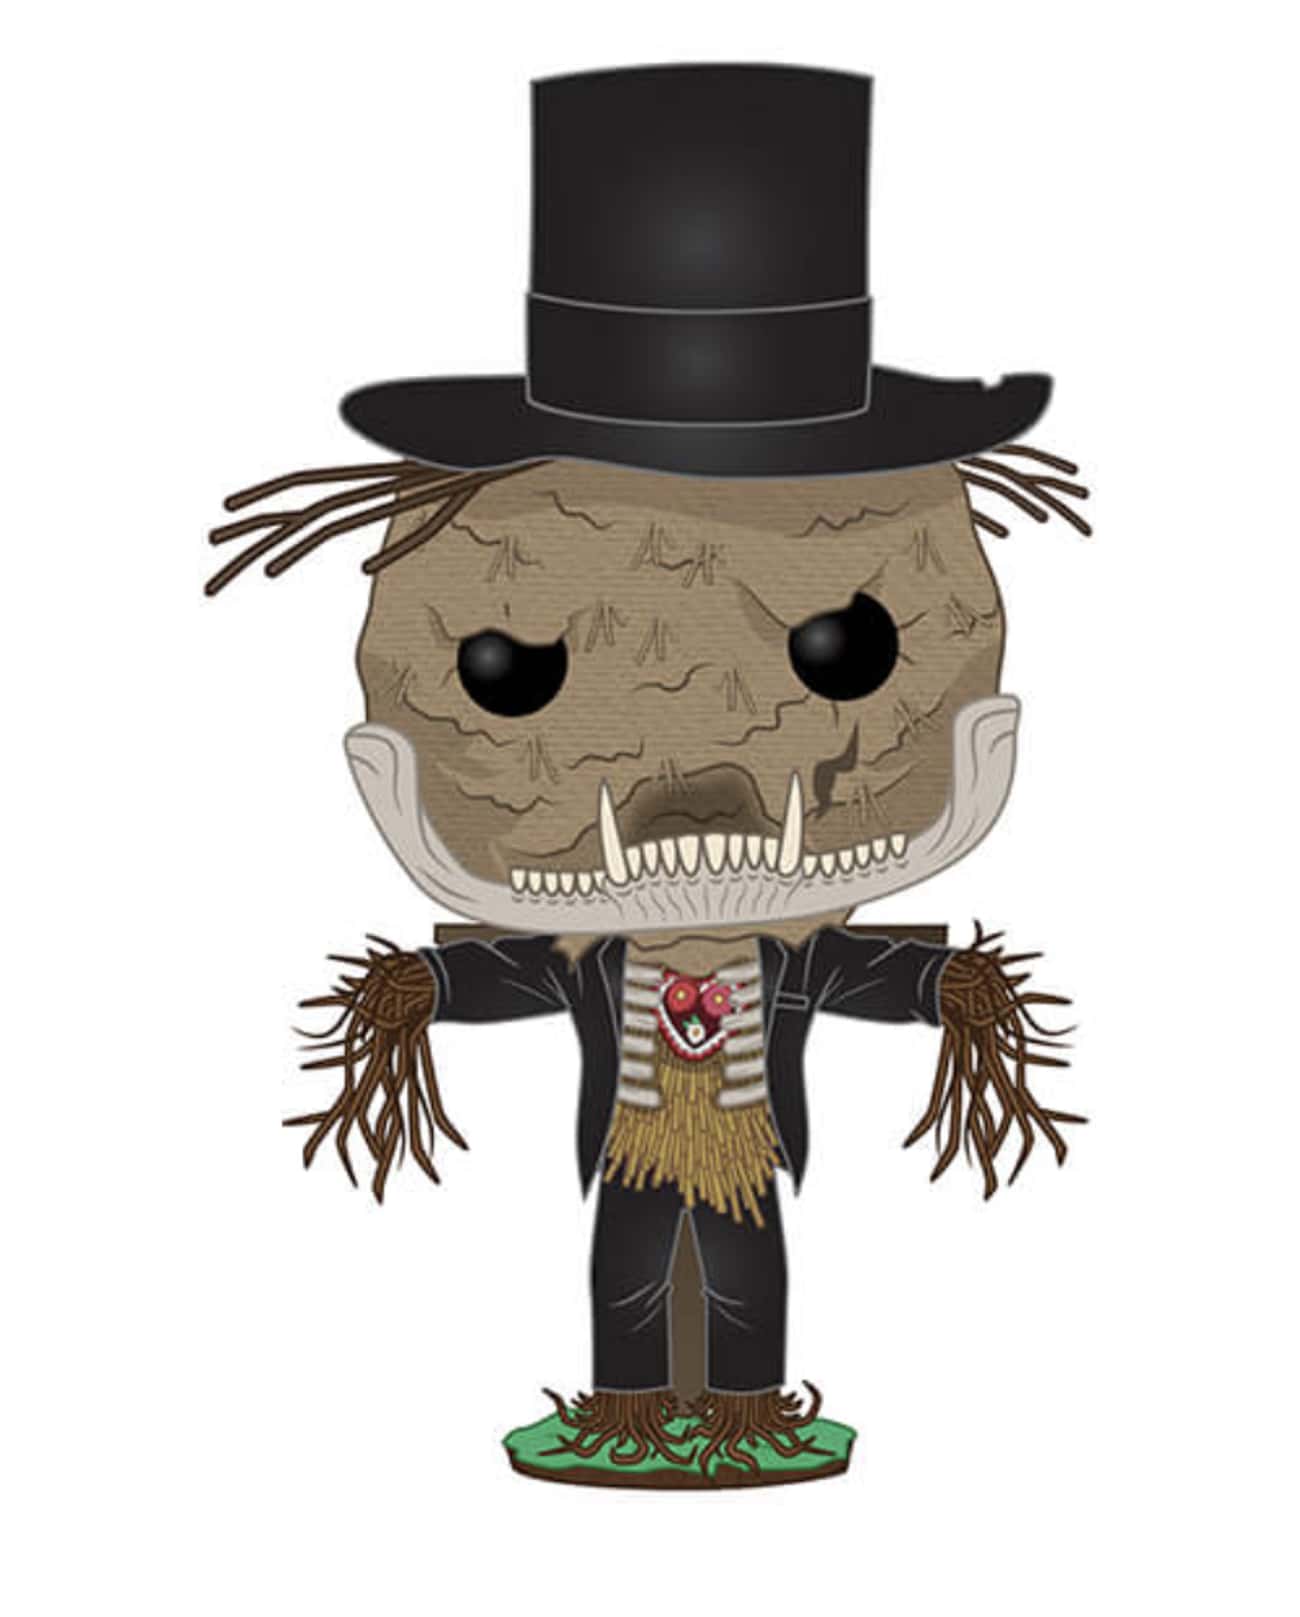 Scarecrow With Teeth From 'Creepshow'